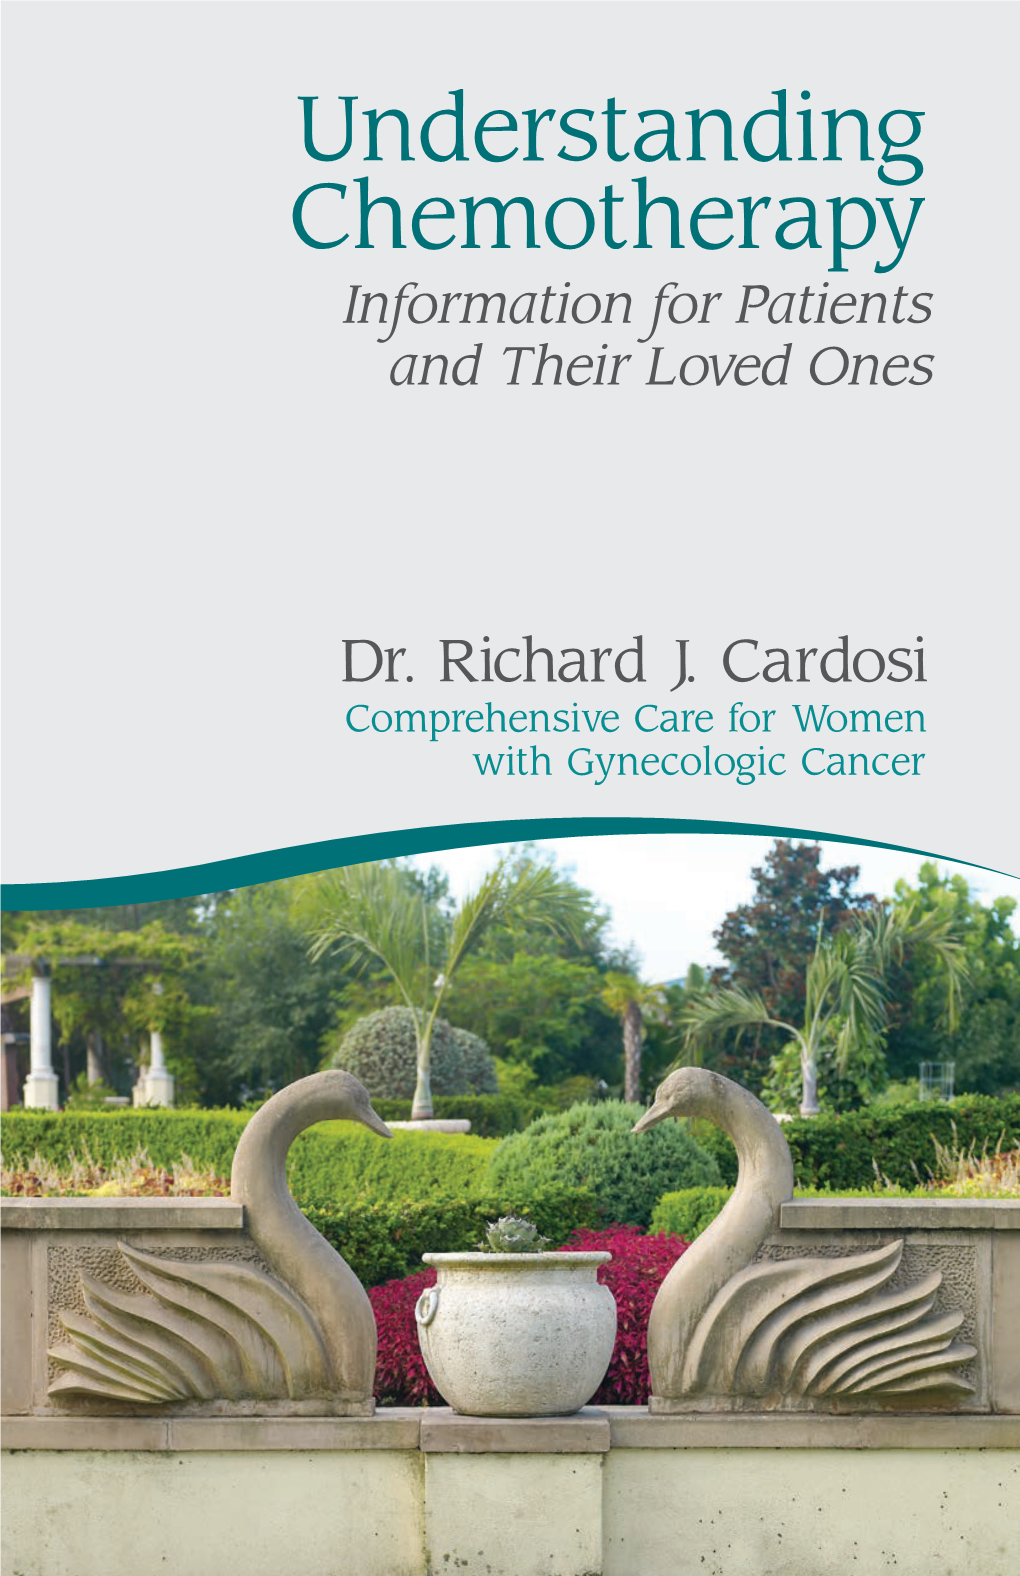 Understanding Chemotherapy Information for Patients and Their Loved Ones